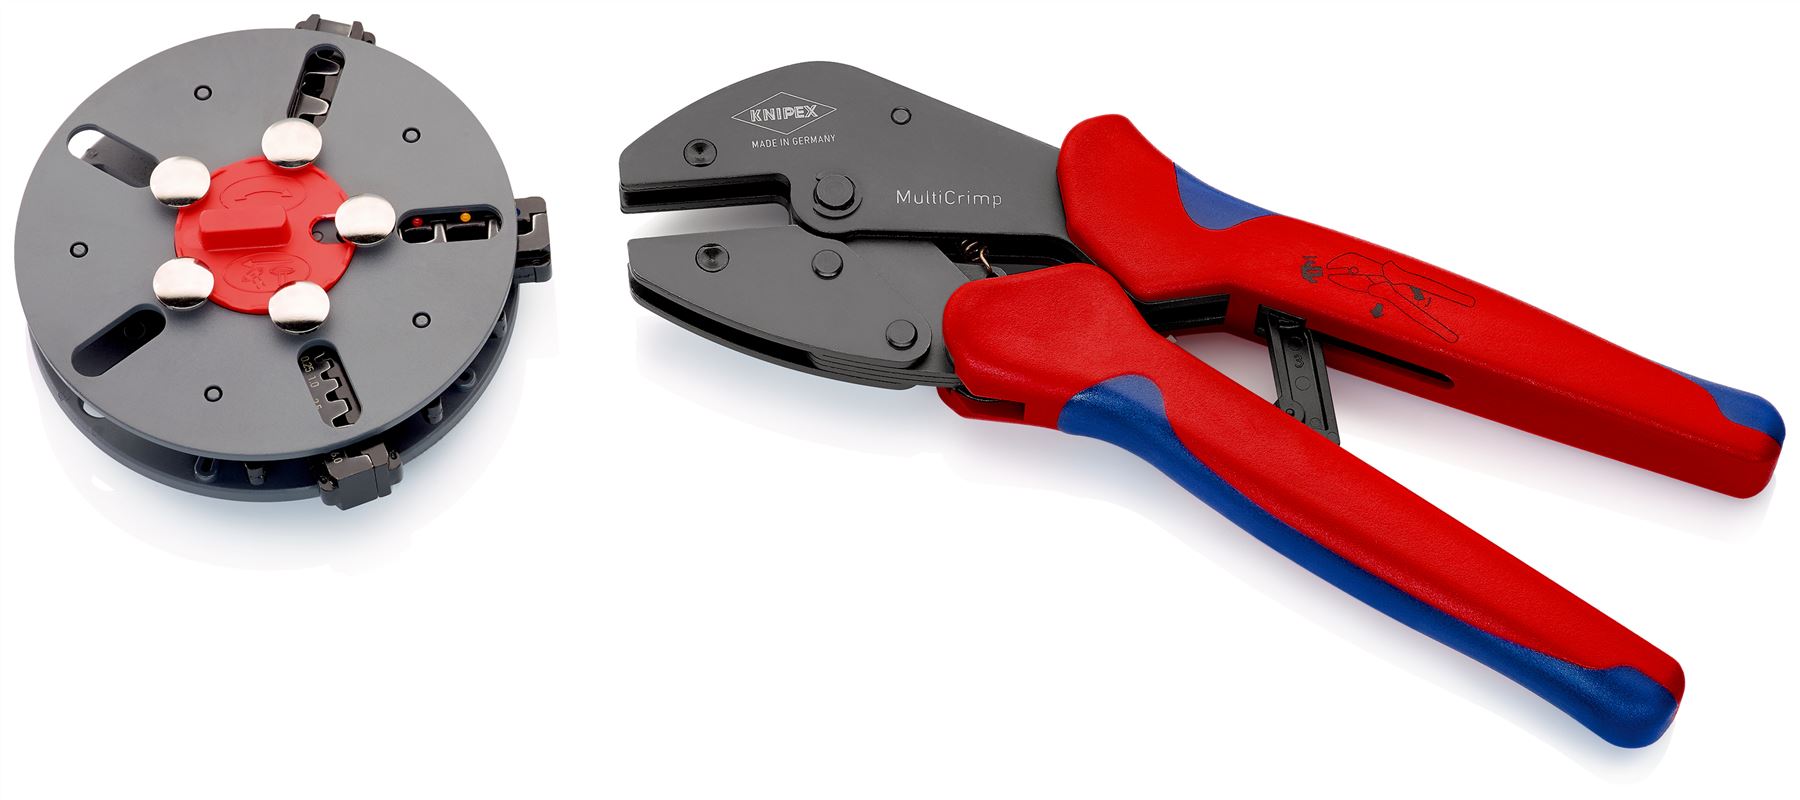 Knipex MultiCrimp 250mm Lever Action Crimping Pliers with Changer Maga